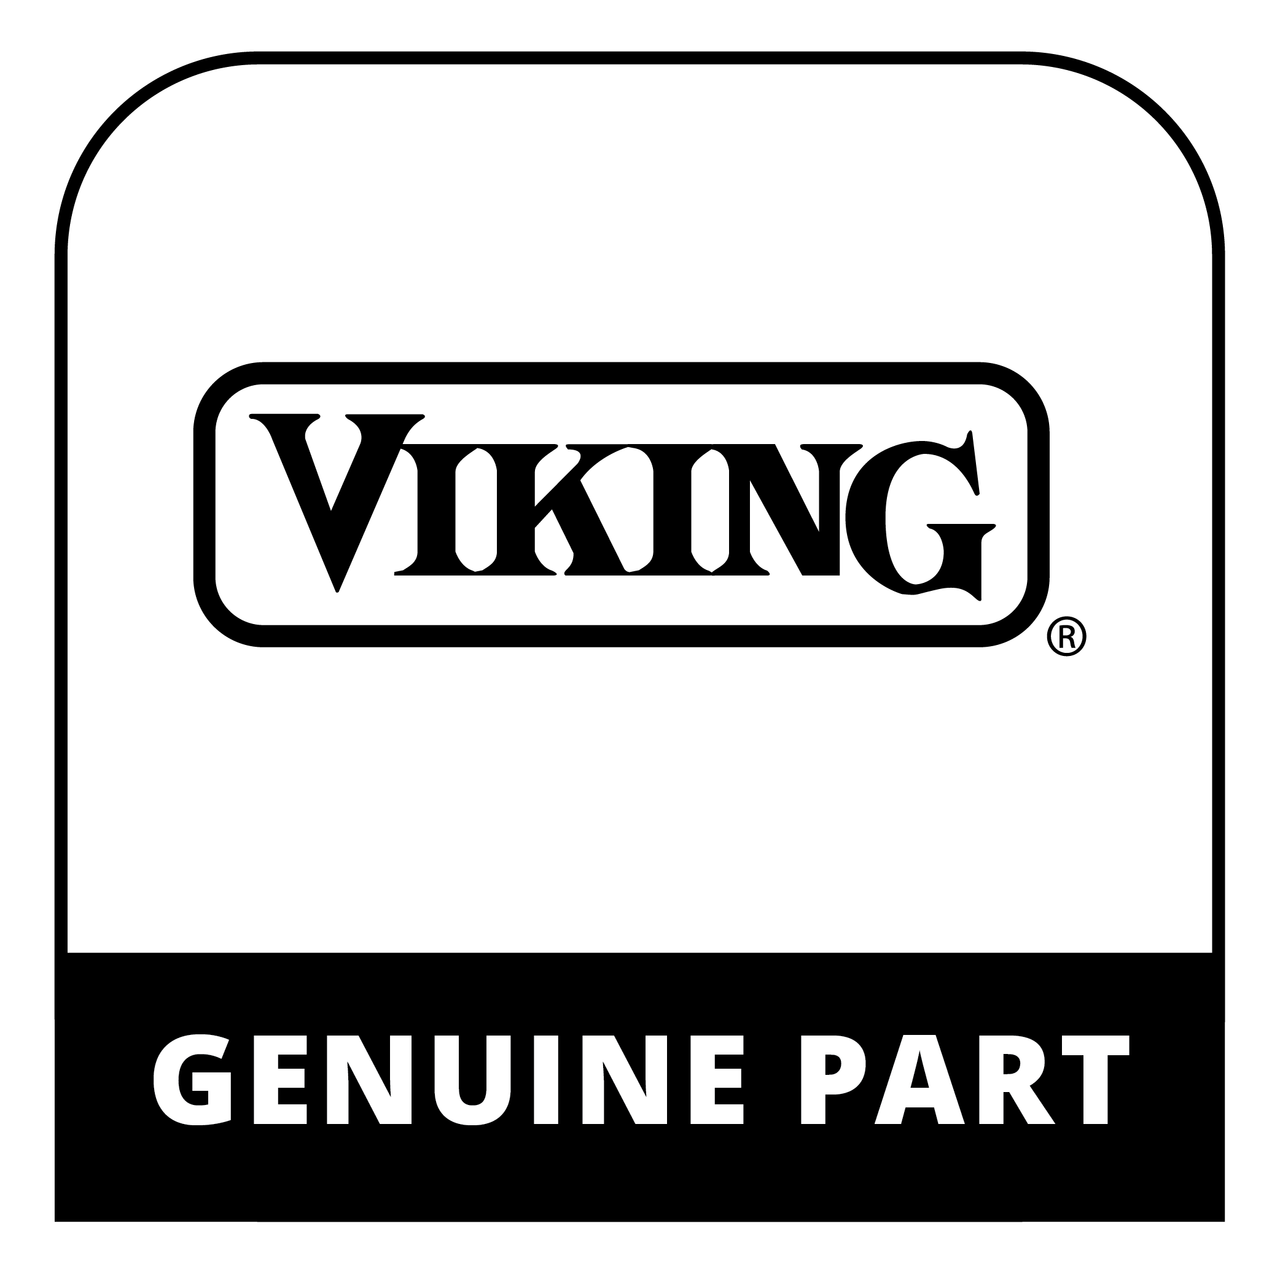 Viking PA030002AL - ***DISCONTINUED 01/19 KR***   NLA - BLK OR WHT ONLY - Genuine Viking Part